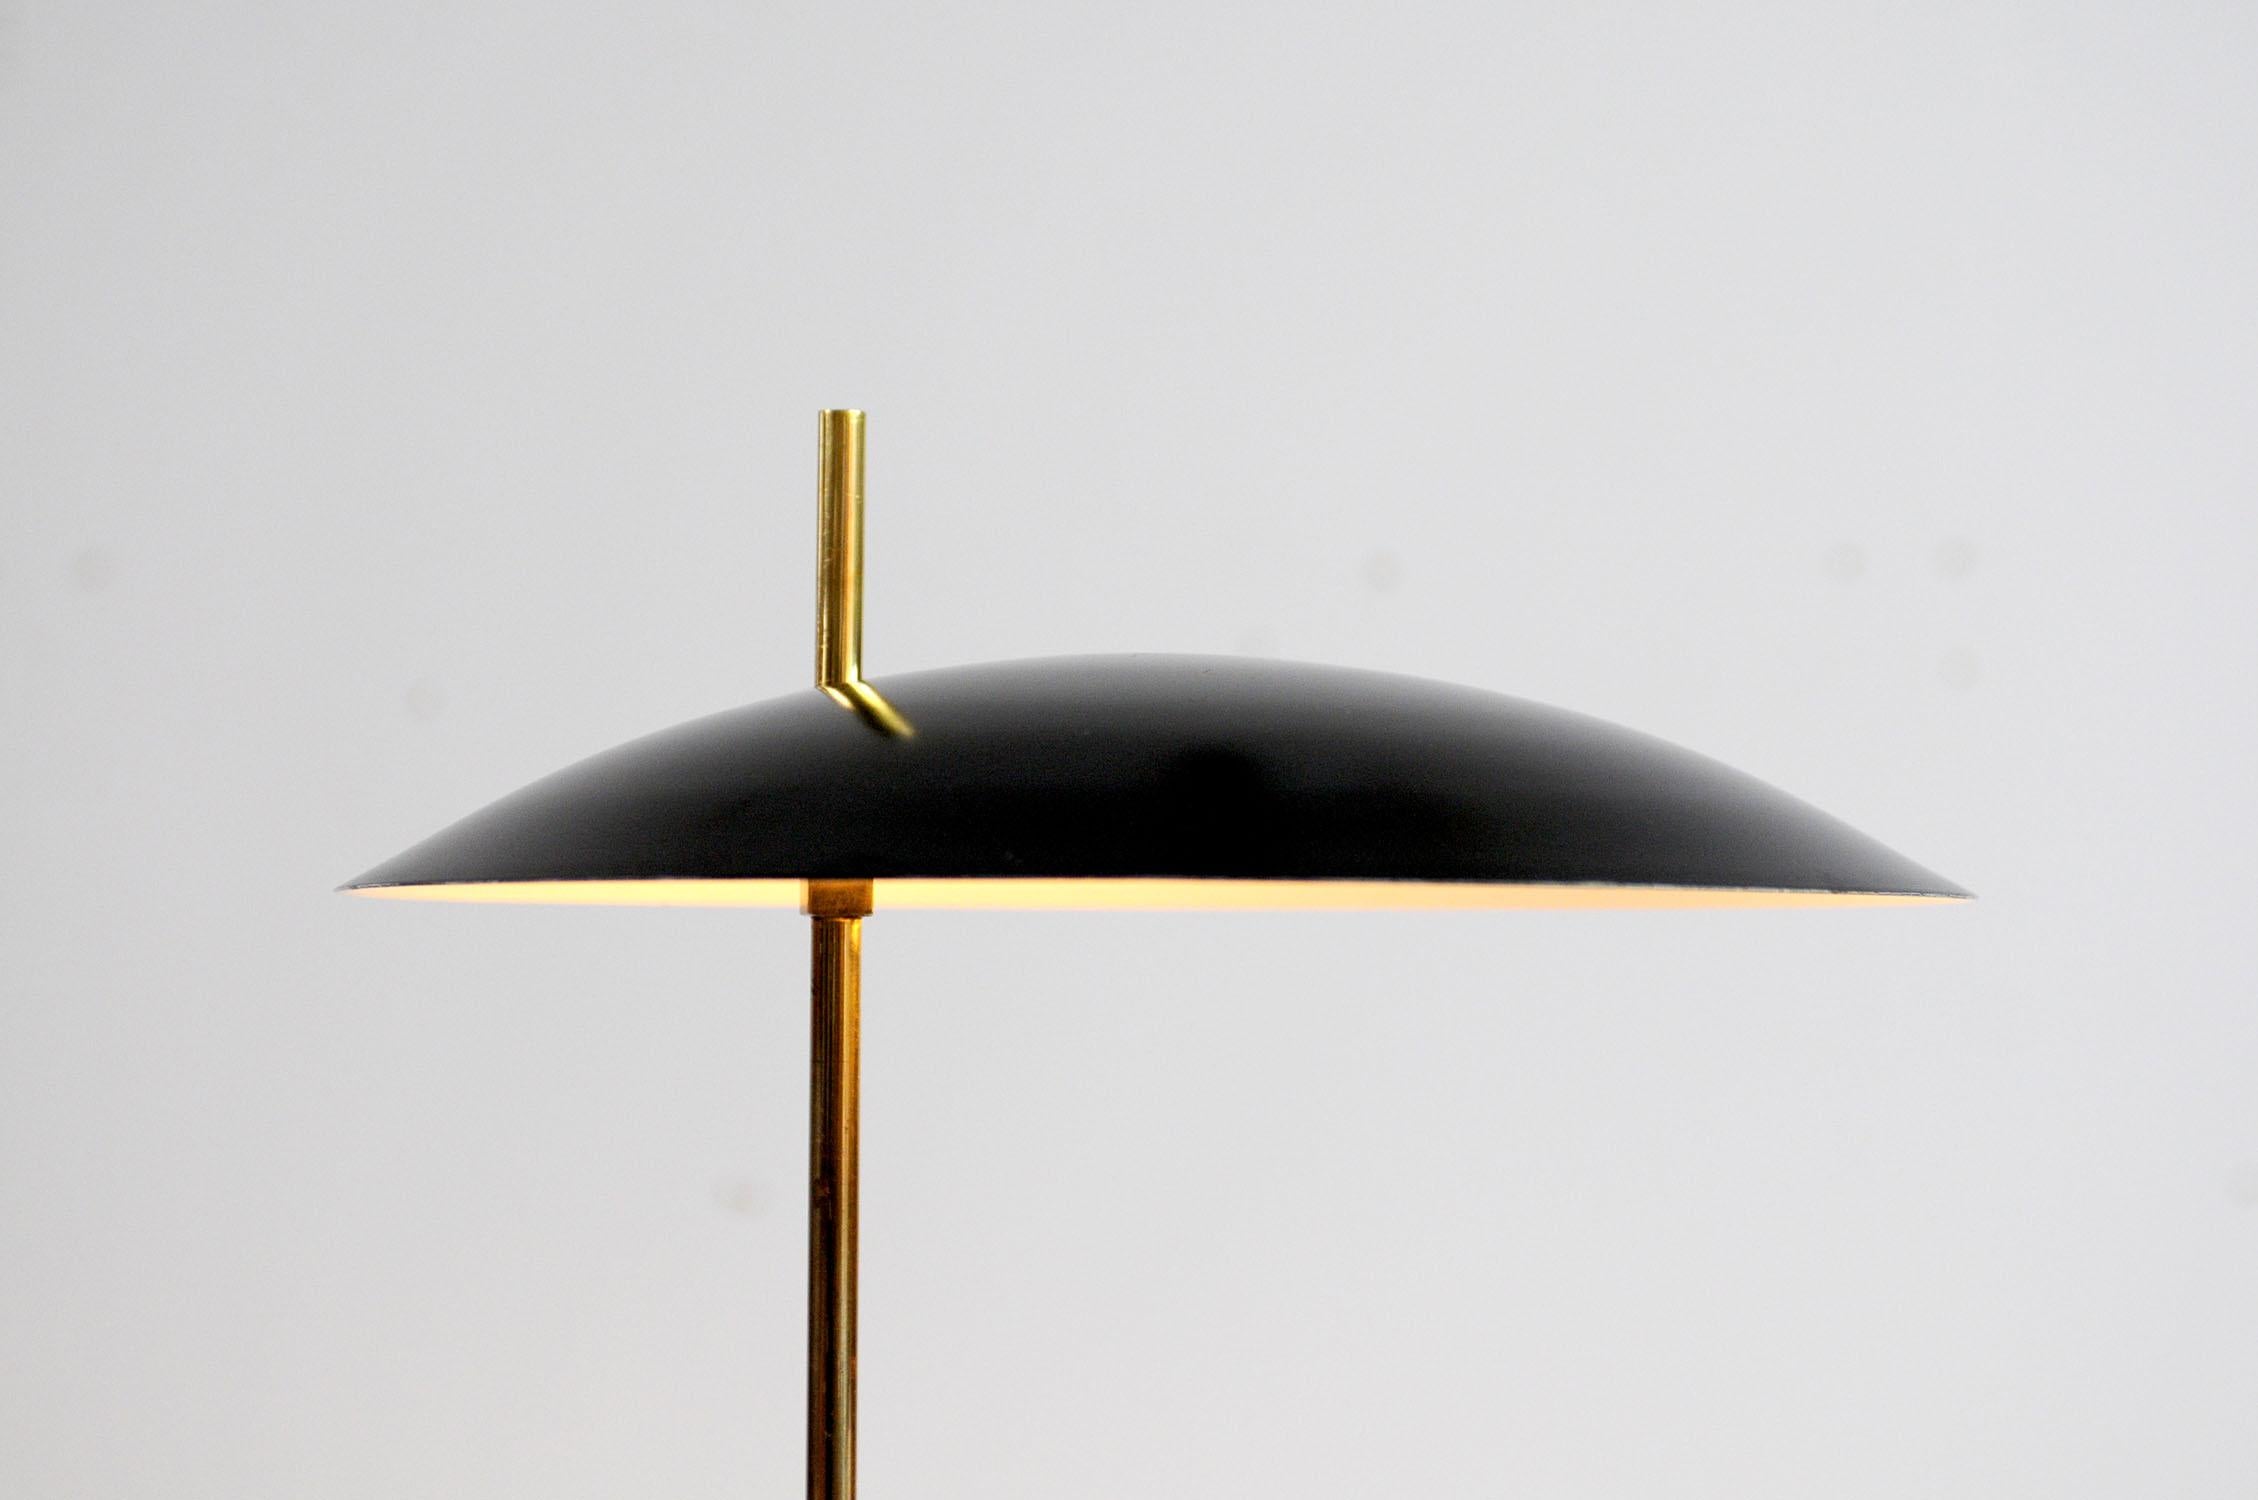 Pierre Disderot, rare table lamp model 1013, original edition from the fifties, France, 1955. Black lacquered metal, golden brass, switch under the reflector.
Very good original condition.